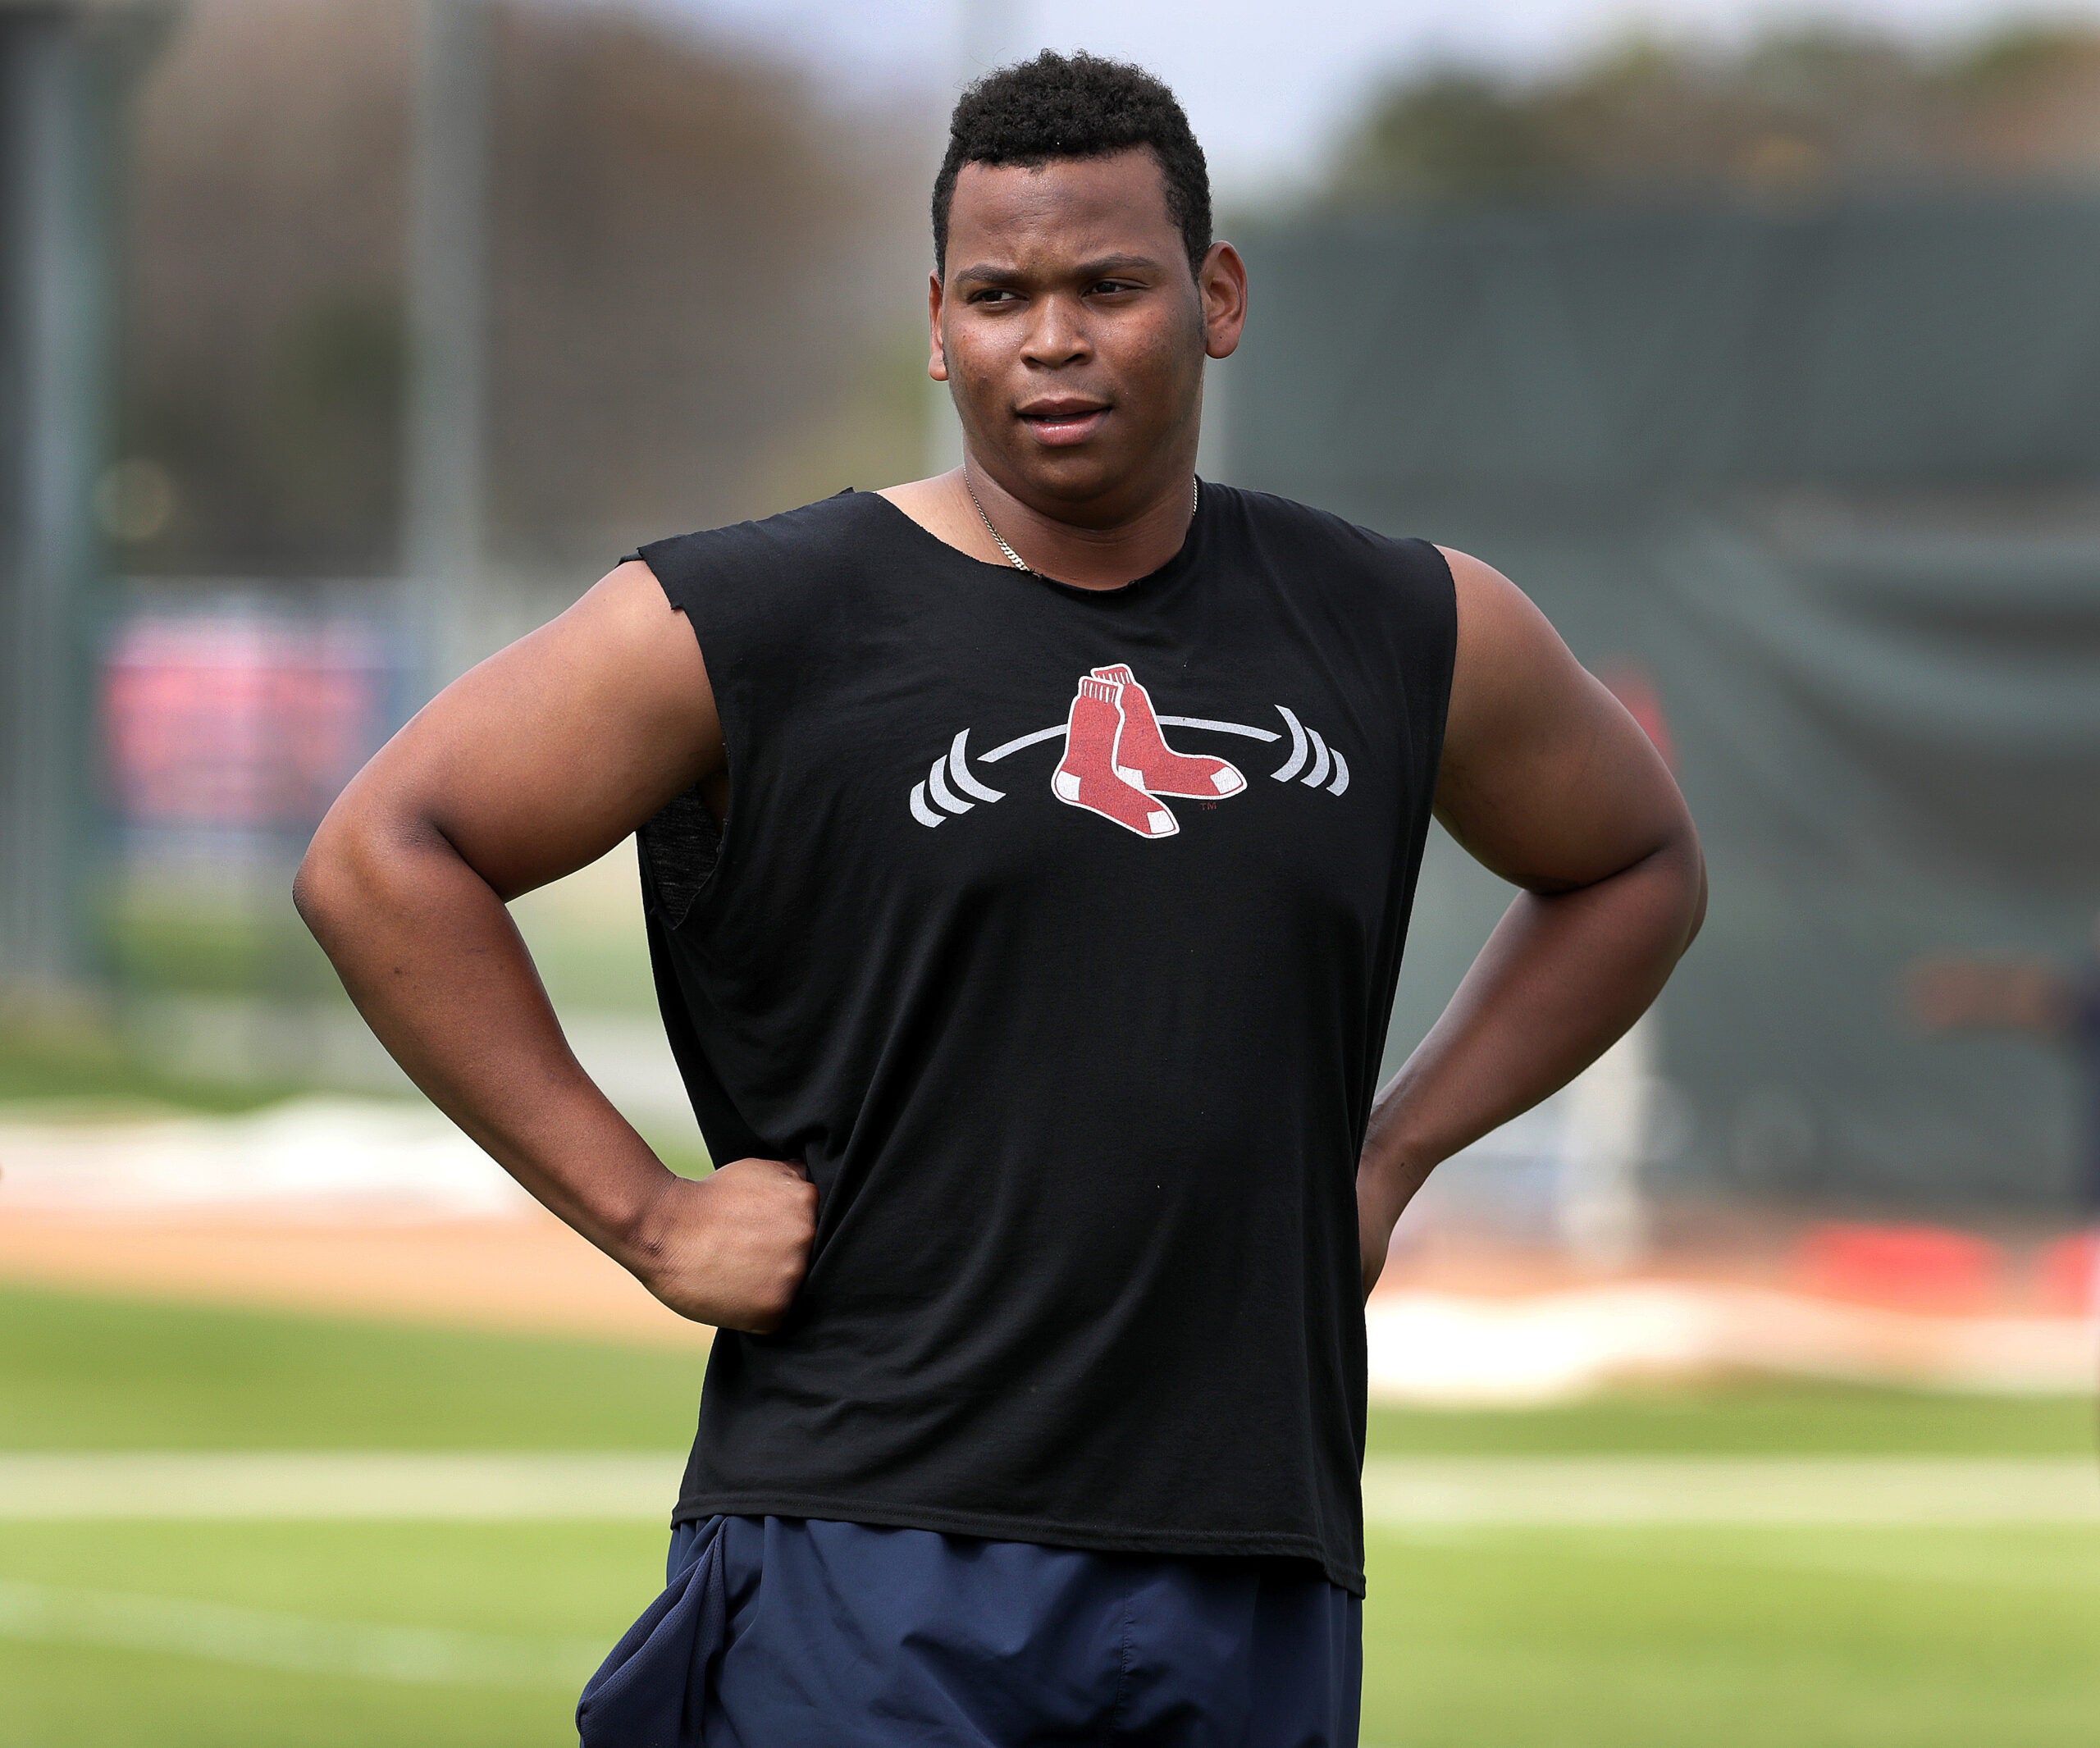 Should the Red Sox fast-track Rafael Devers to the majors?